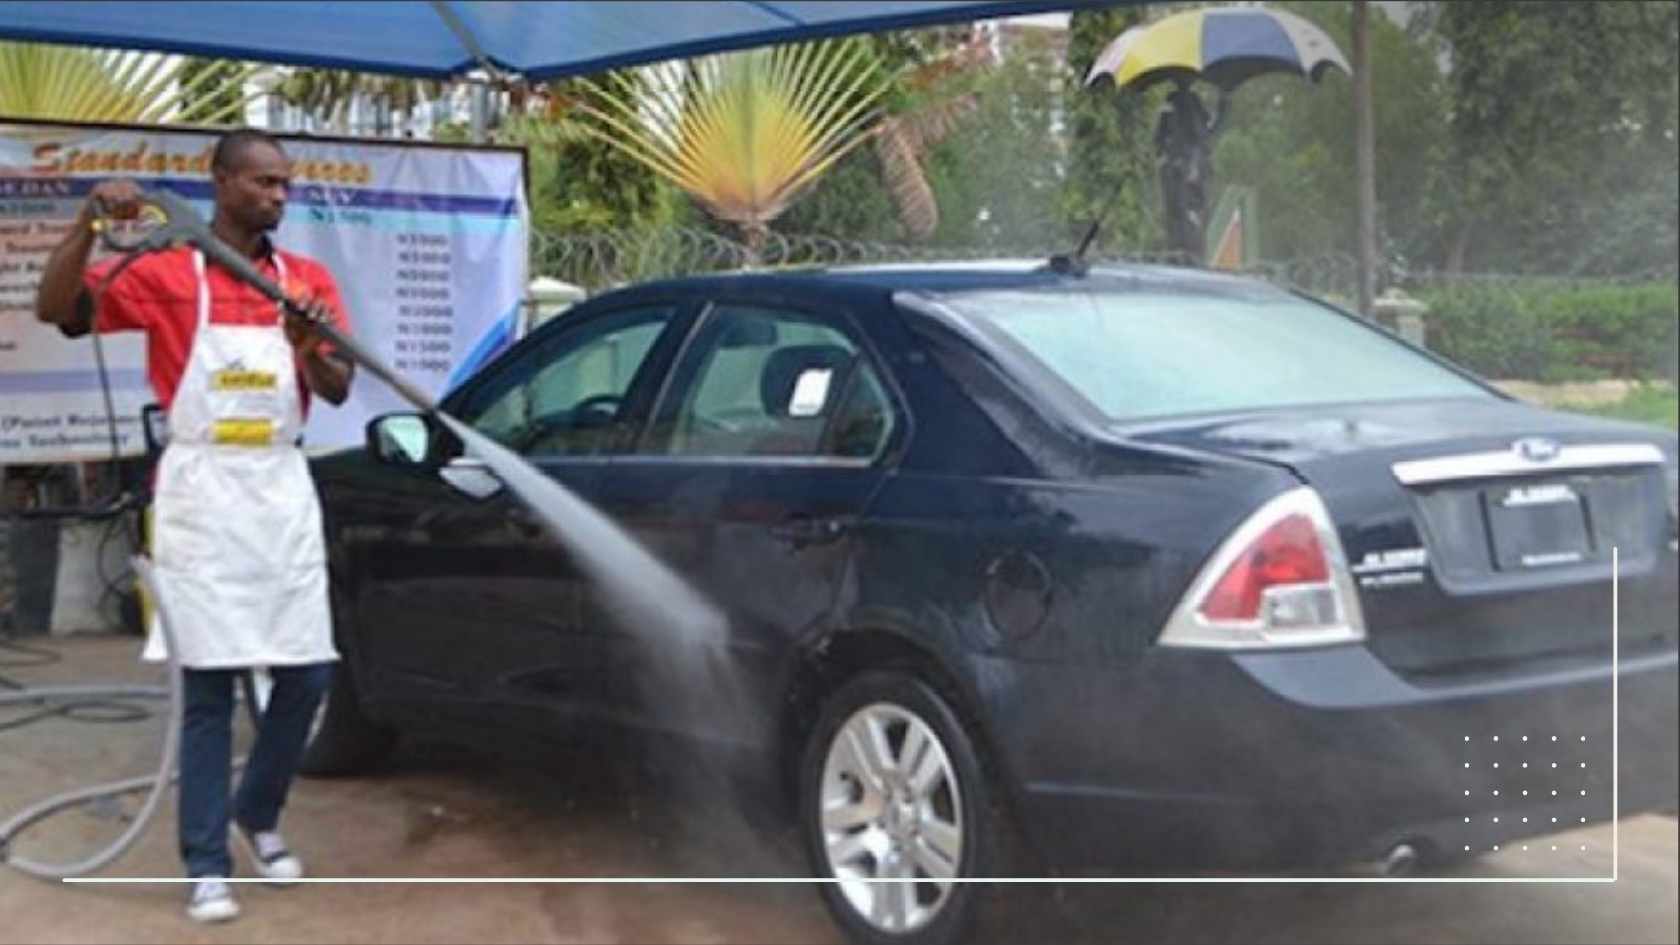 An image of a Car Wash business